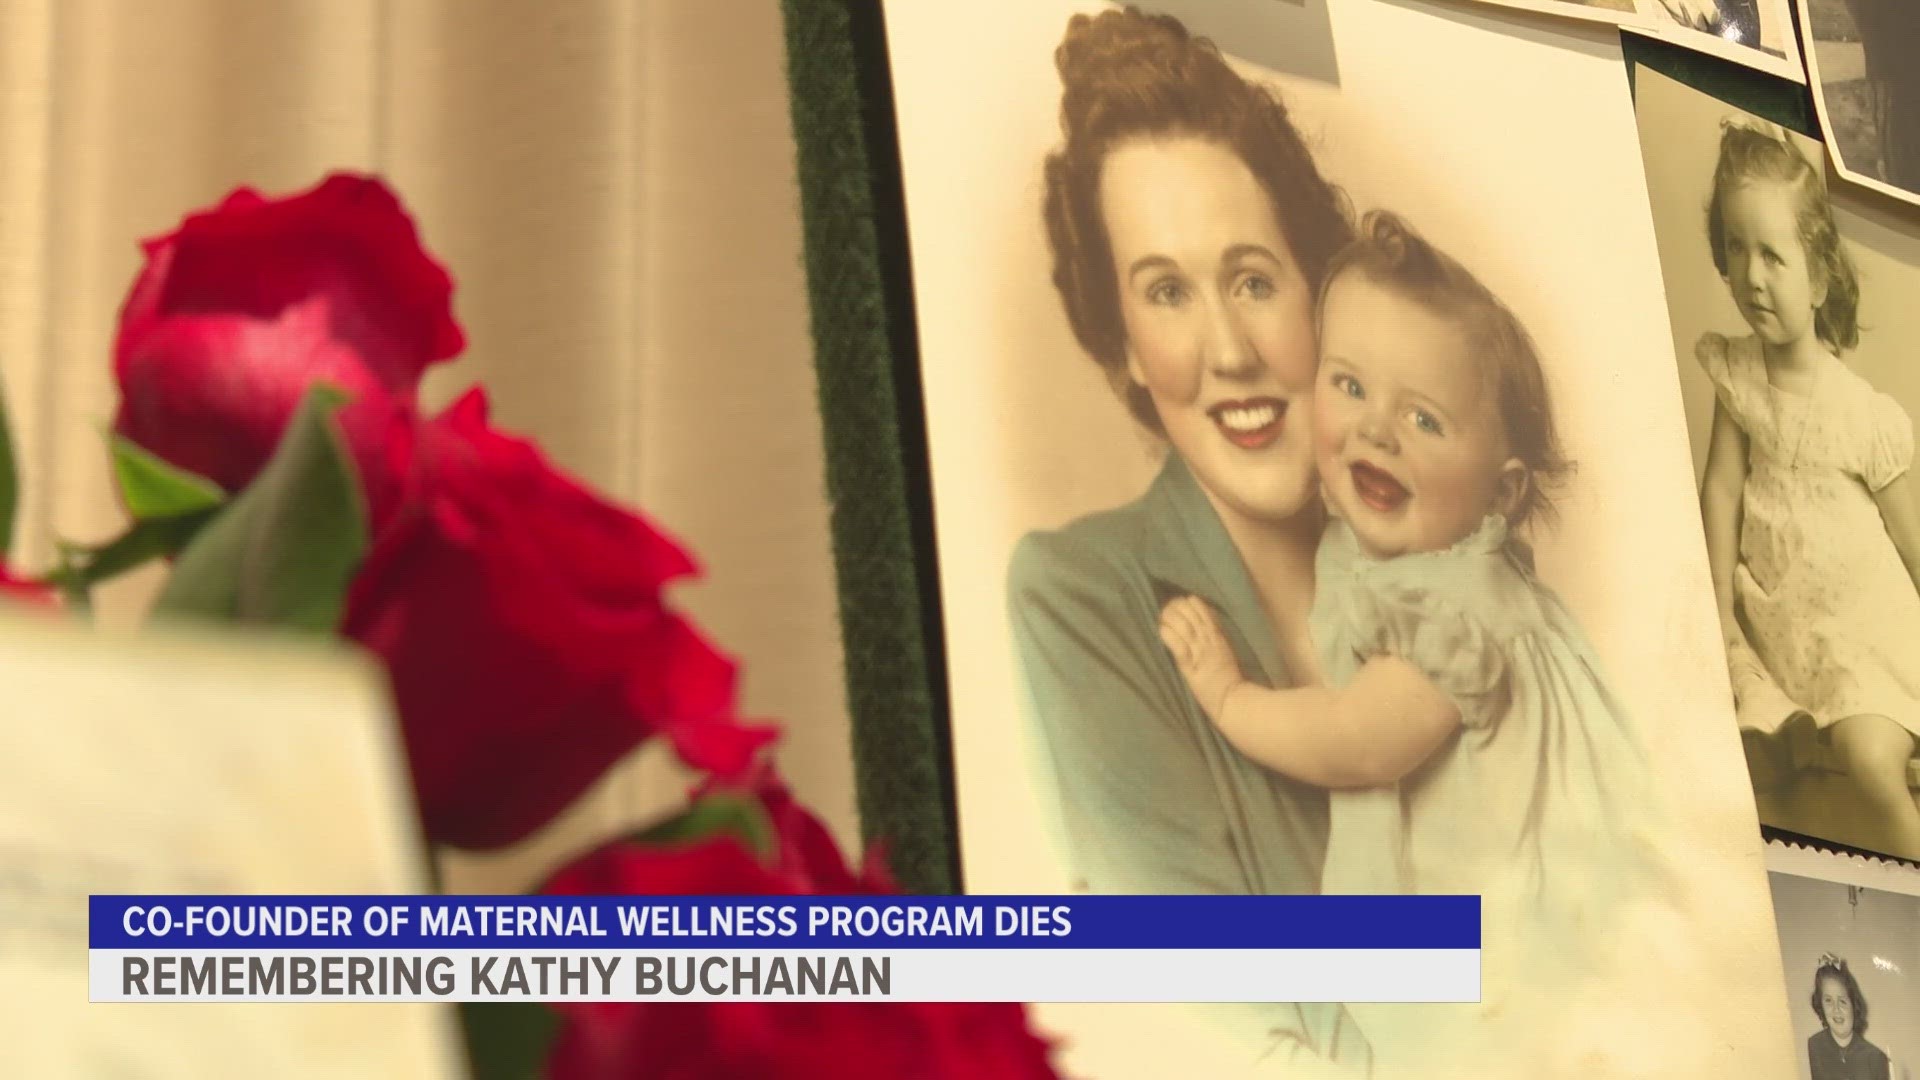 Kathy Buchanan helped "thousands" of women through postpartum depression, grief, anxiety and more. After her death, outpourings of remembrance flood social media.